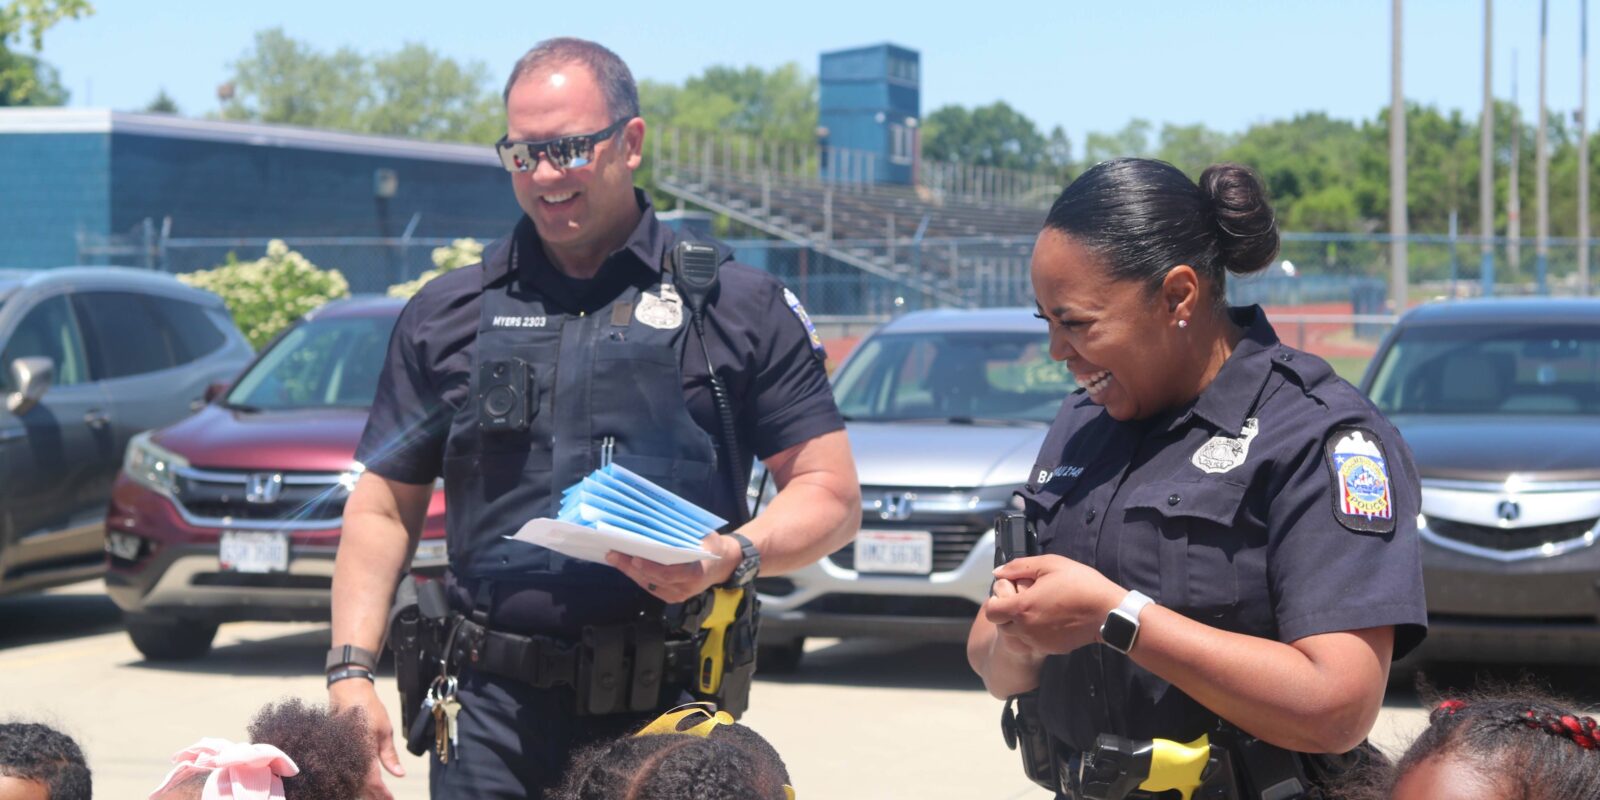 Police officers talking to a group of school age children in a parking lot on a sunny day